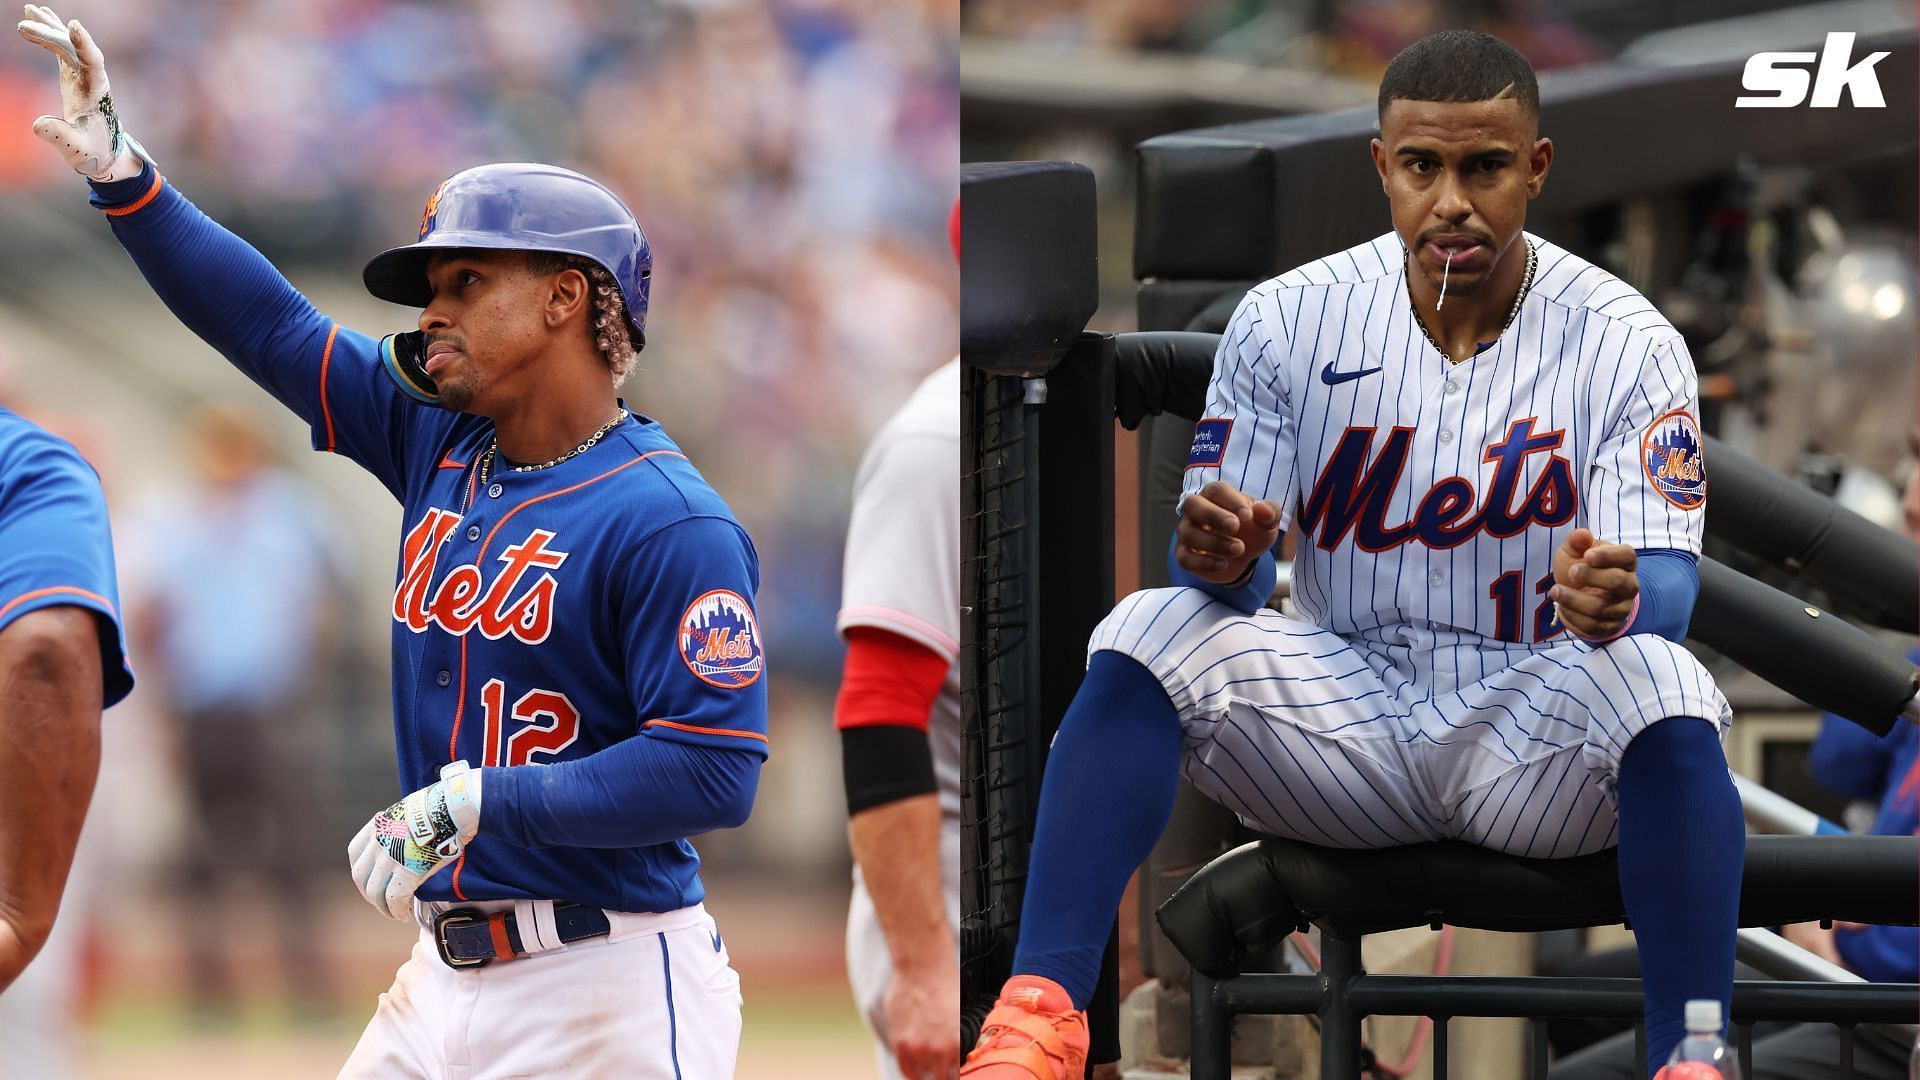 Mets shortstop Francisco Lindor paid a heartfelt tribute to NYC responders on 9/11 anniversary